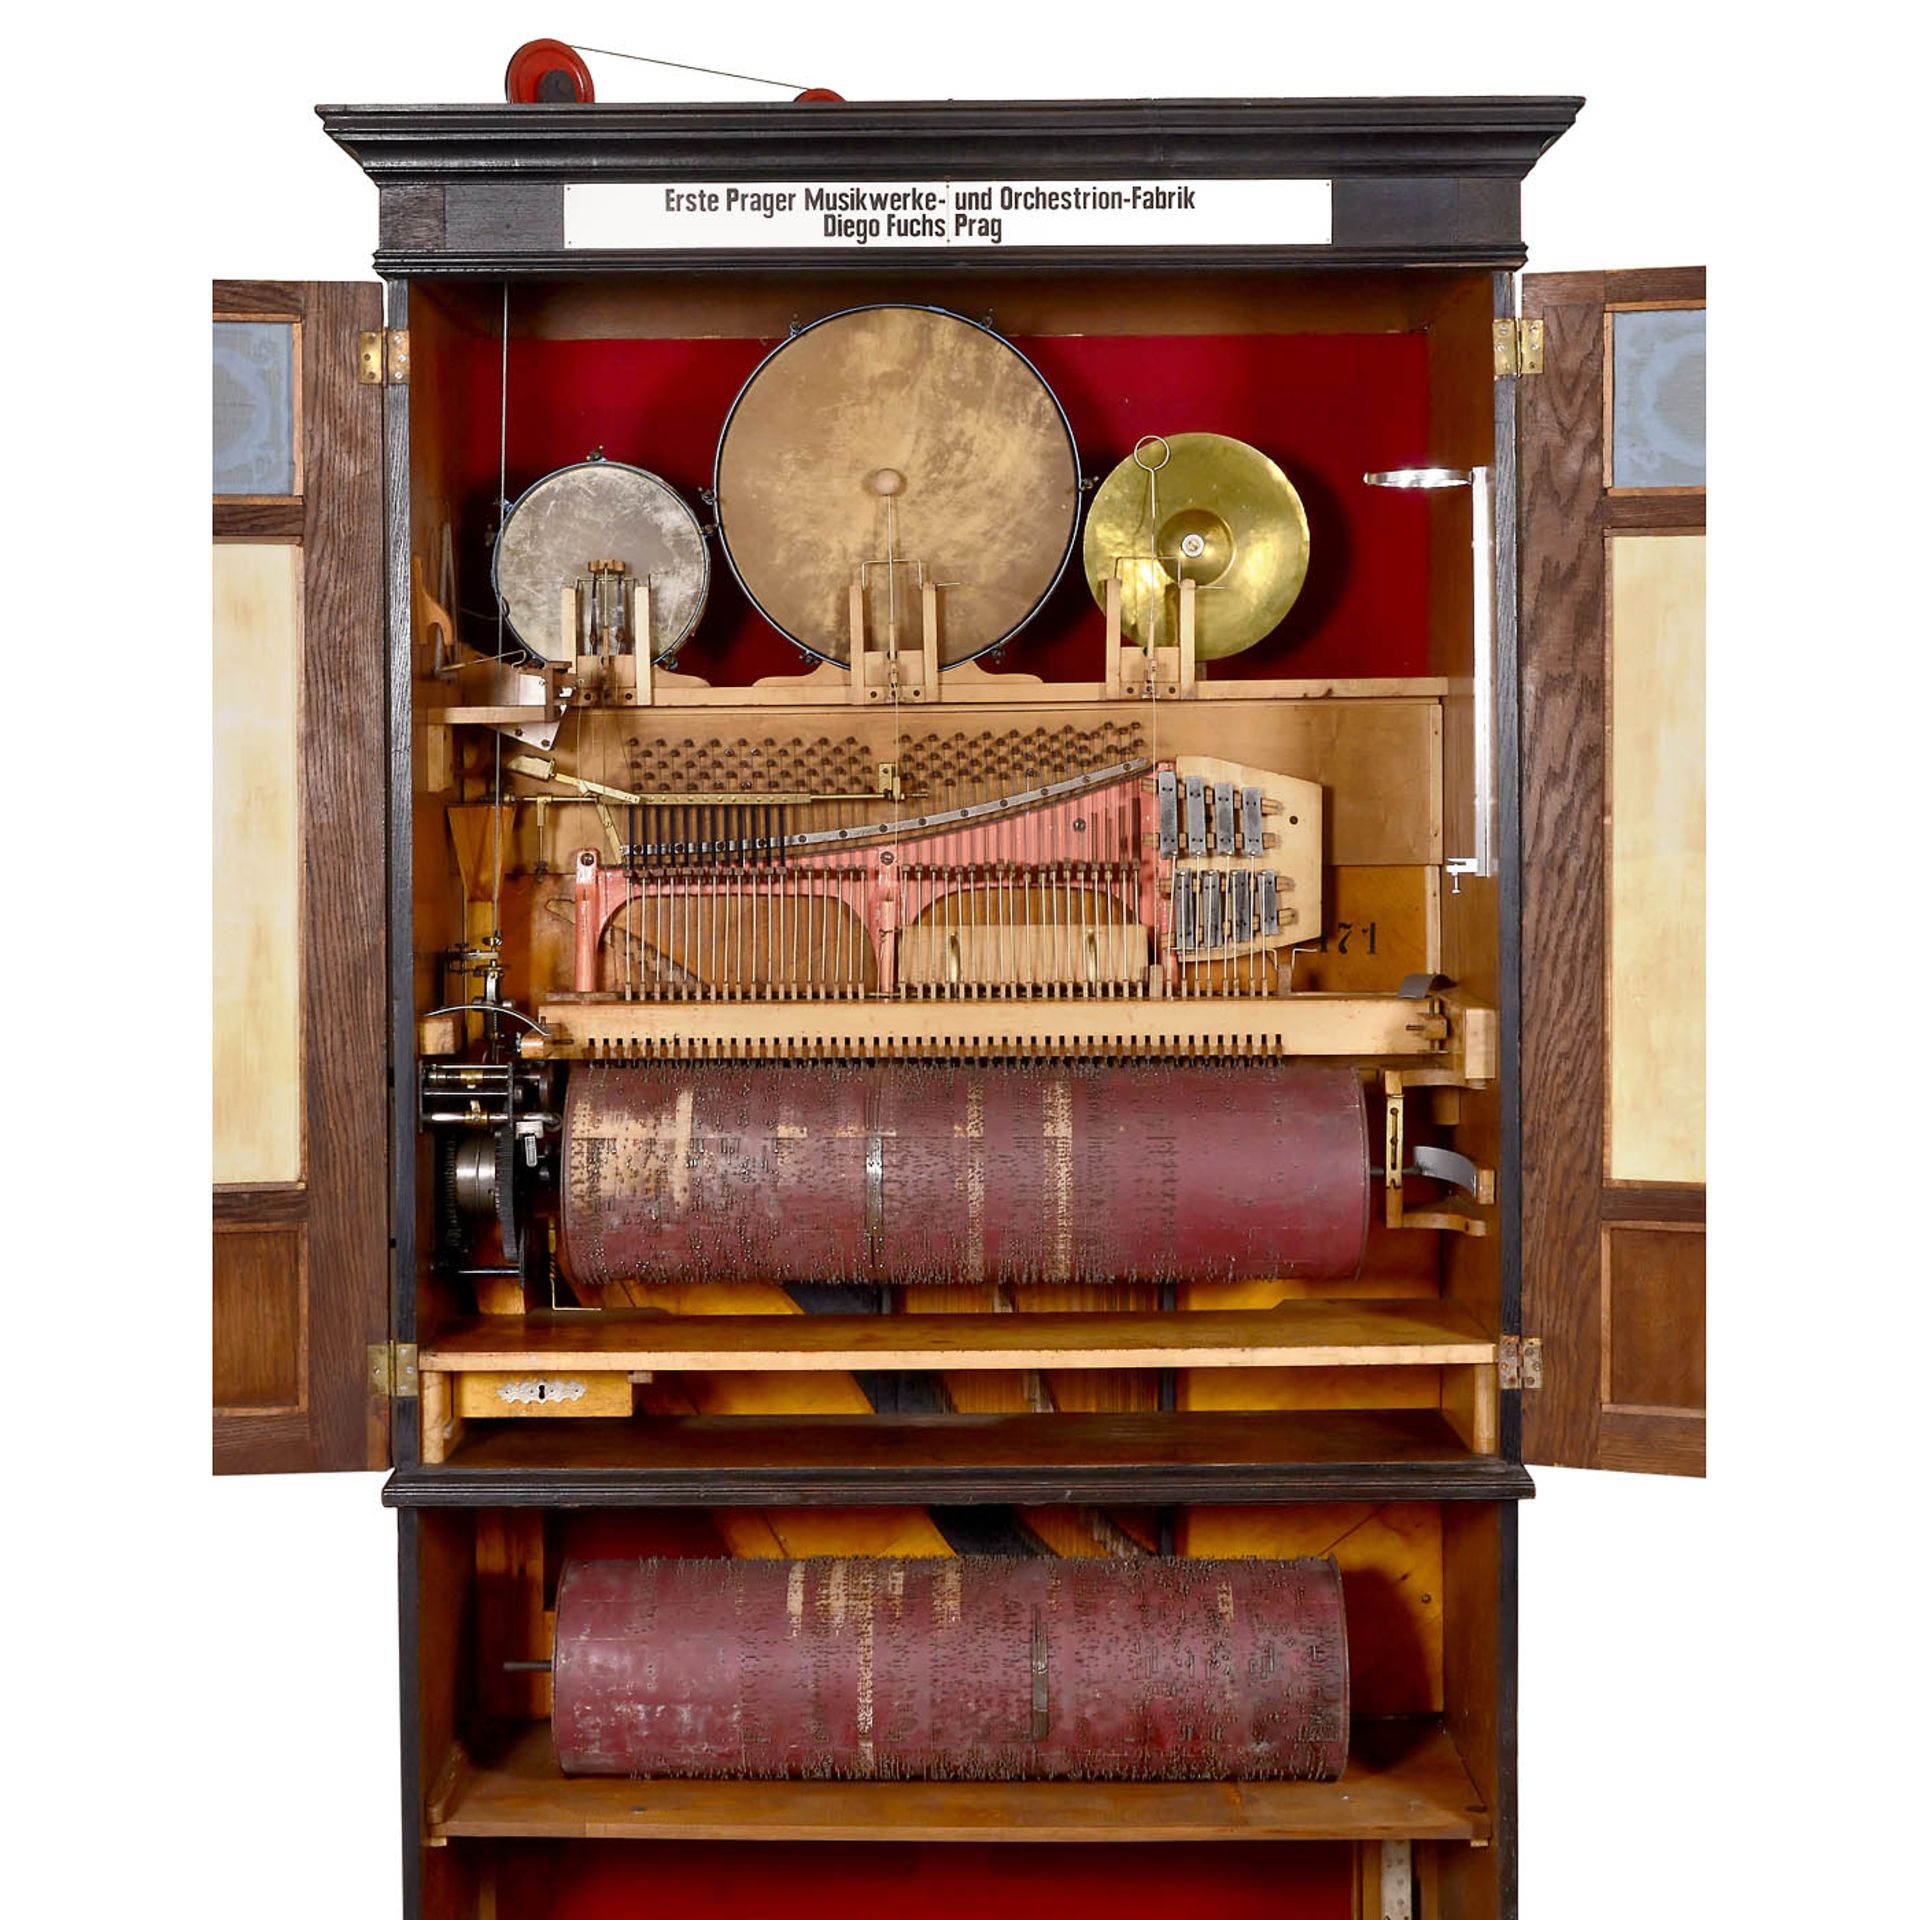 Barrel Orchestrion by Diego Fuchs, c. 1910 - Image 3 of 3